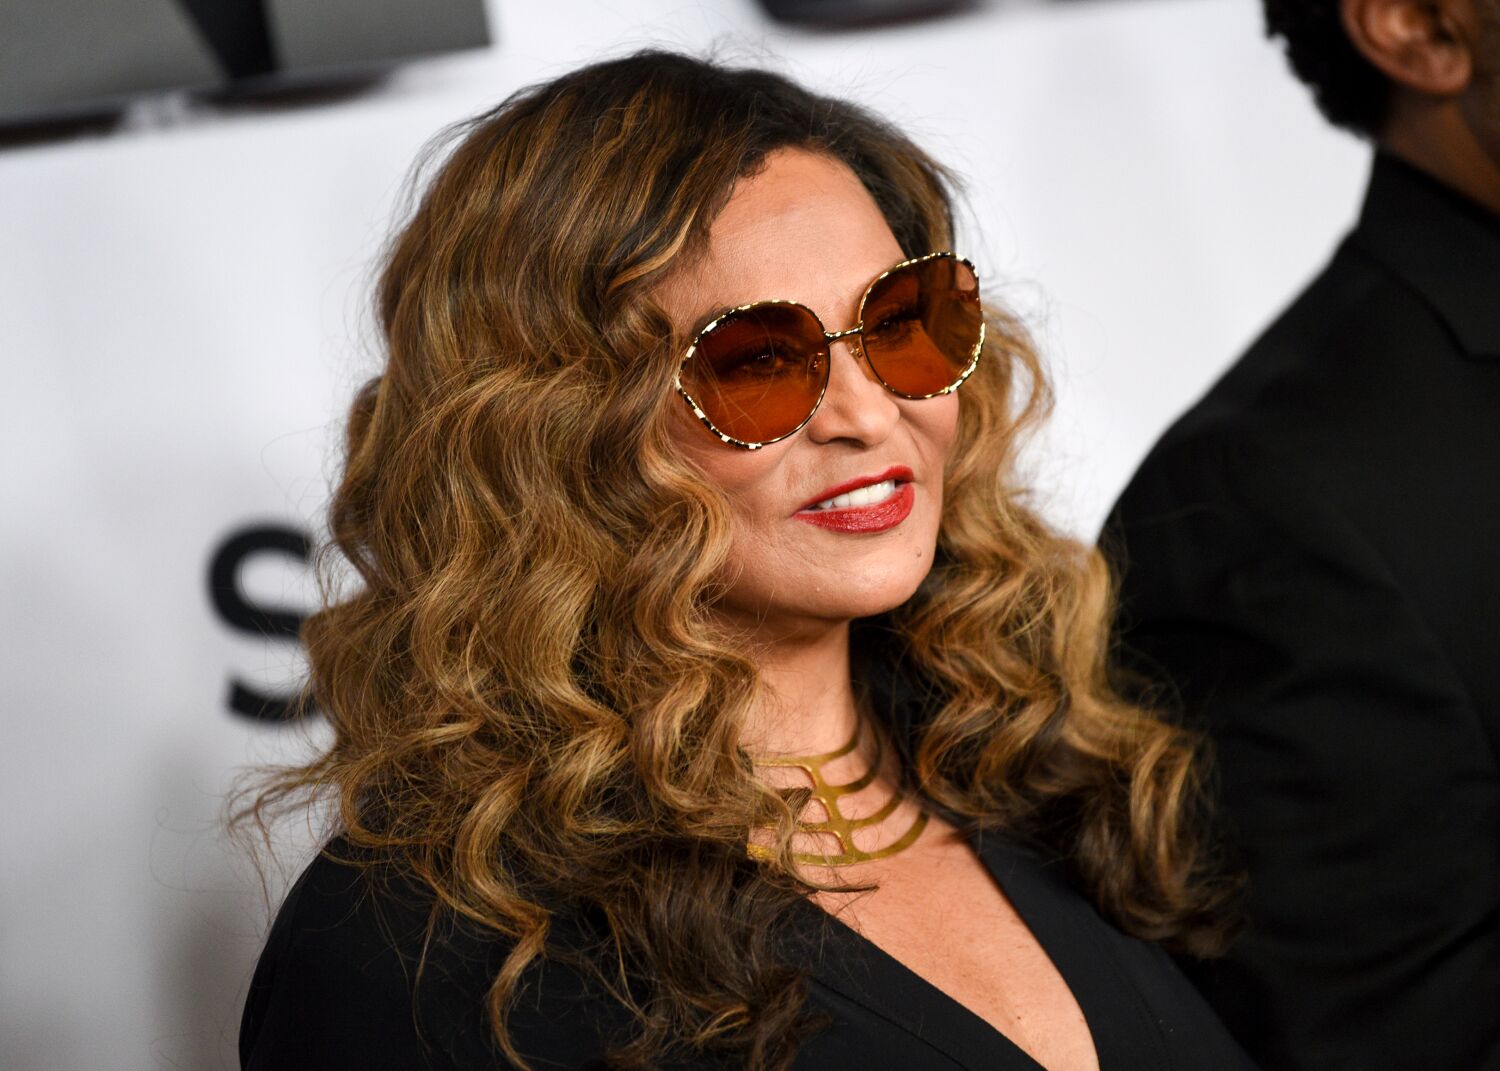 Beyoncé's mom, Tina Knowles-Lawson, robbed of $1 million in jewels and cash in home burglary